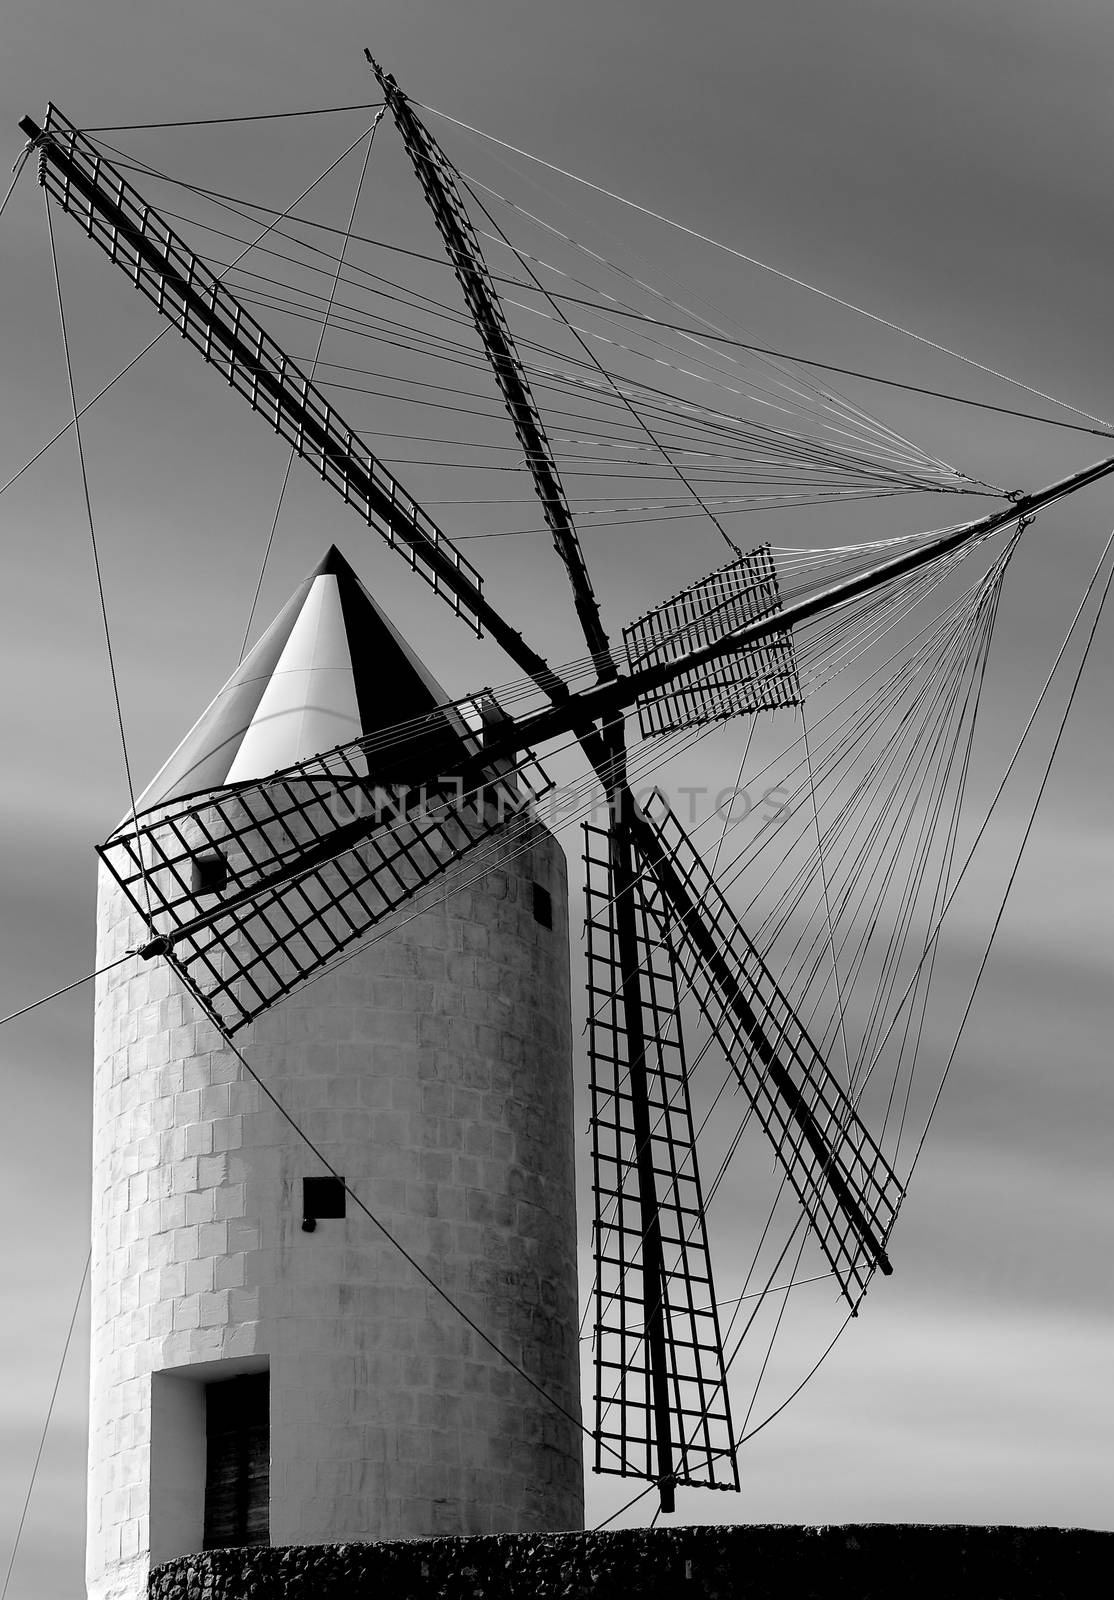 Beautiful Old Spanish Windmill on Cloudy Sky background in Menorca, Balearic Islands. Black and White Toned